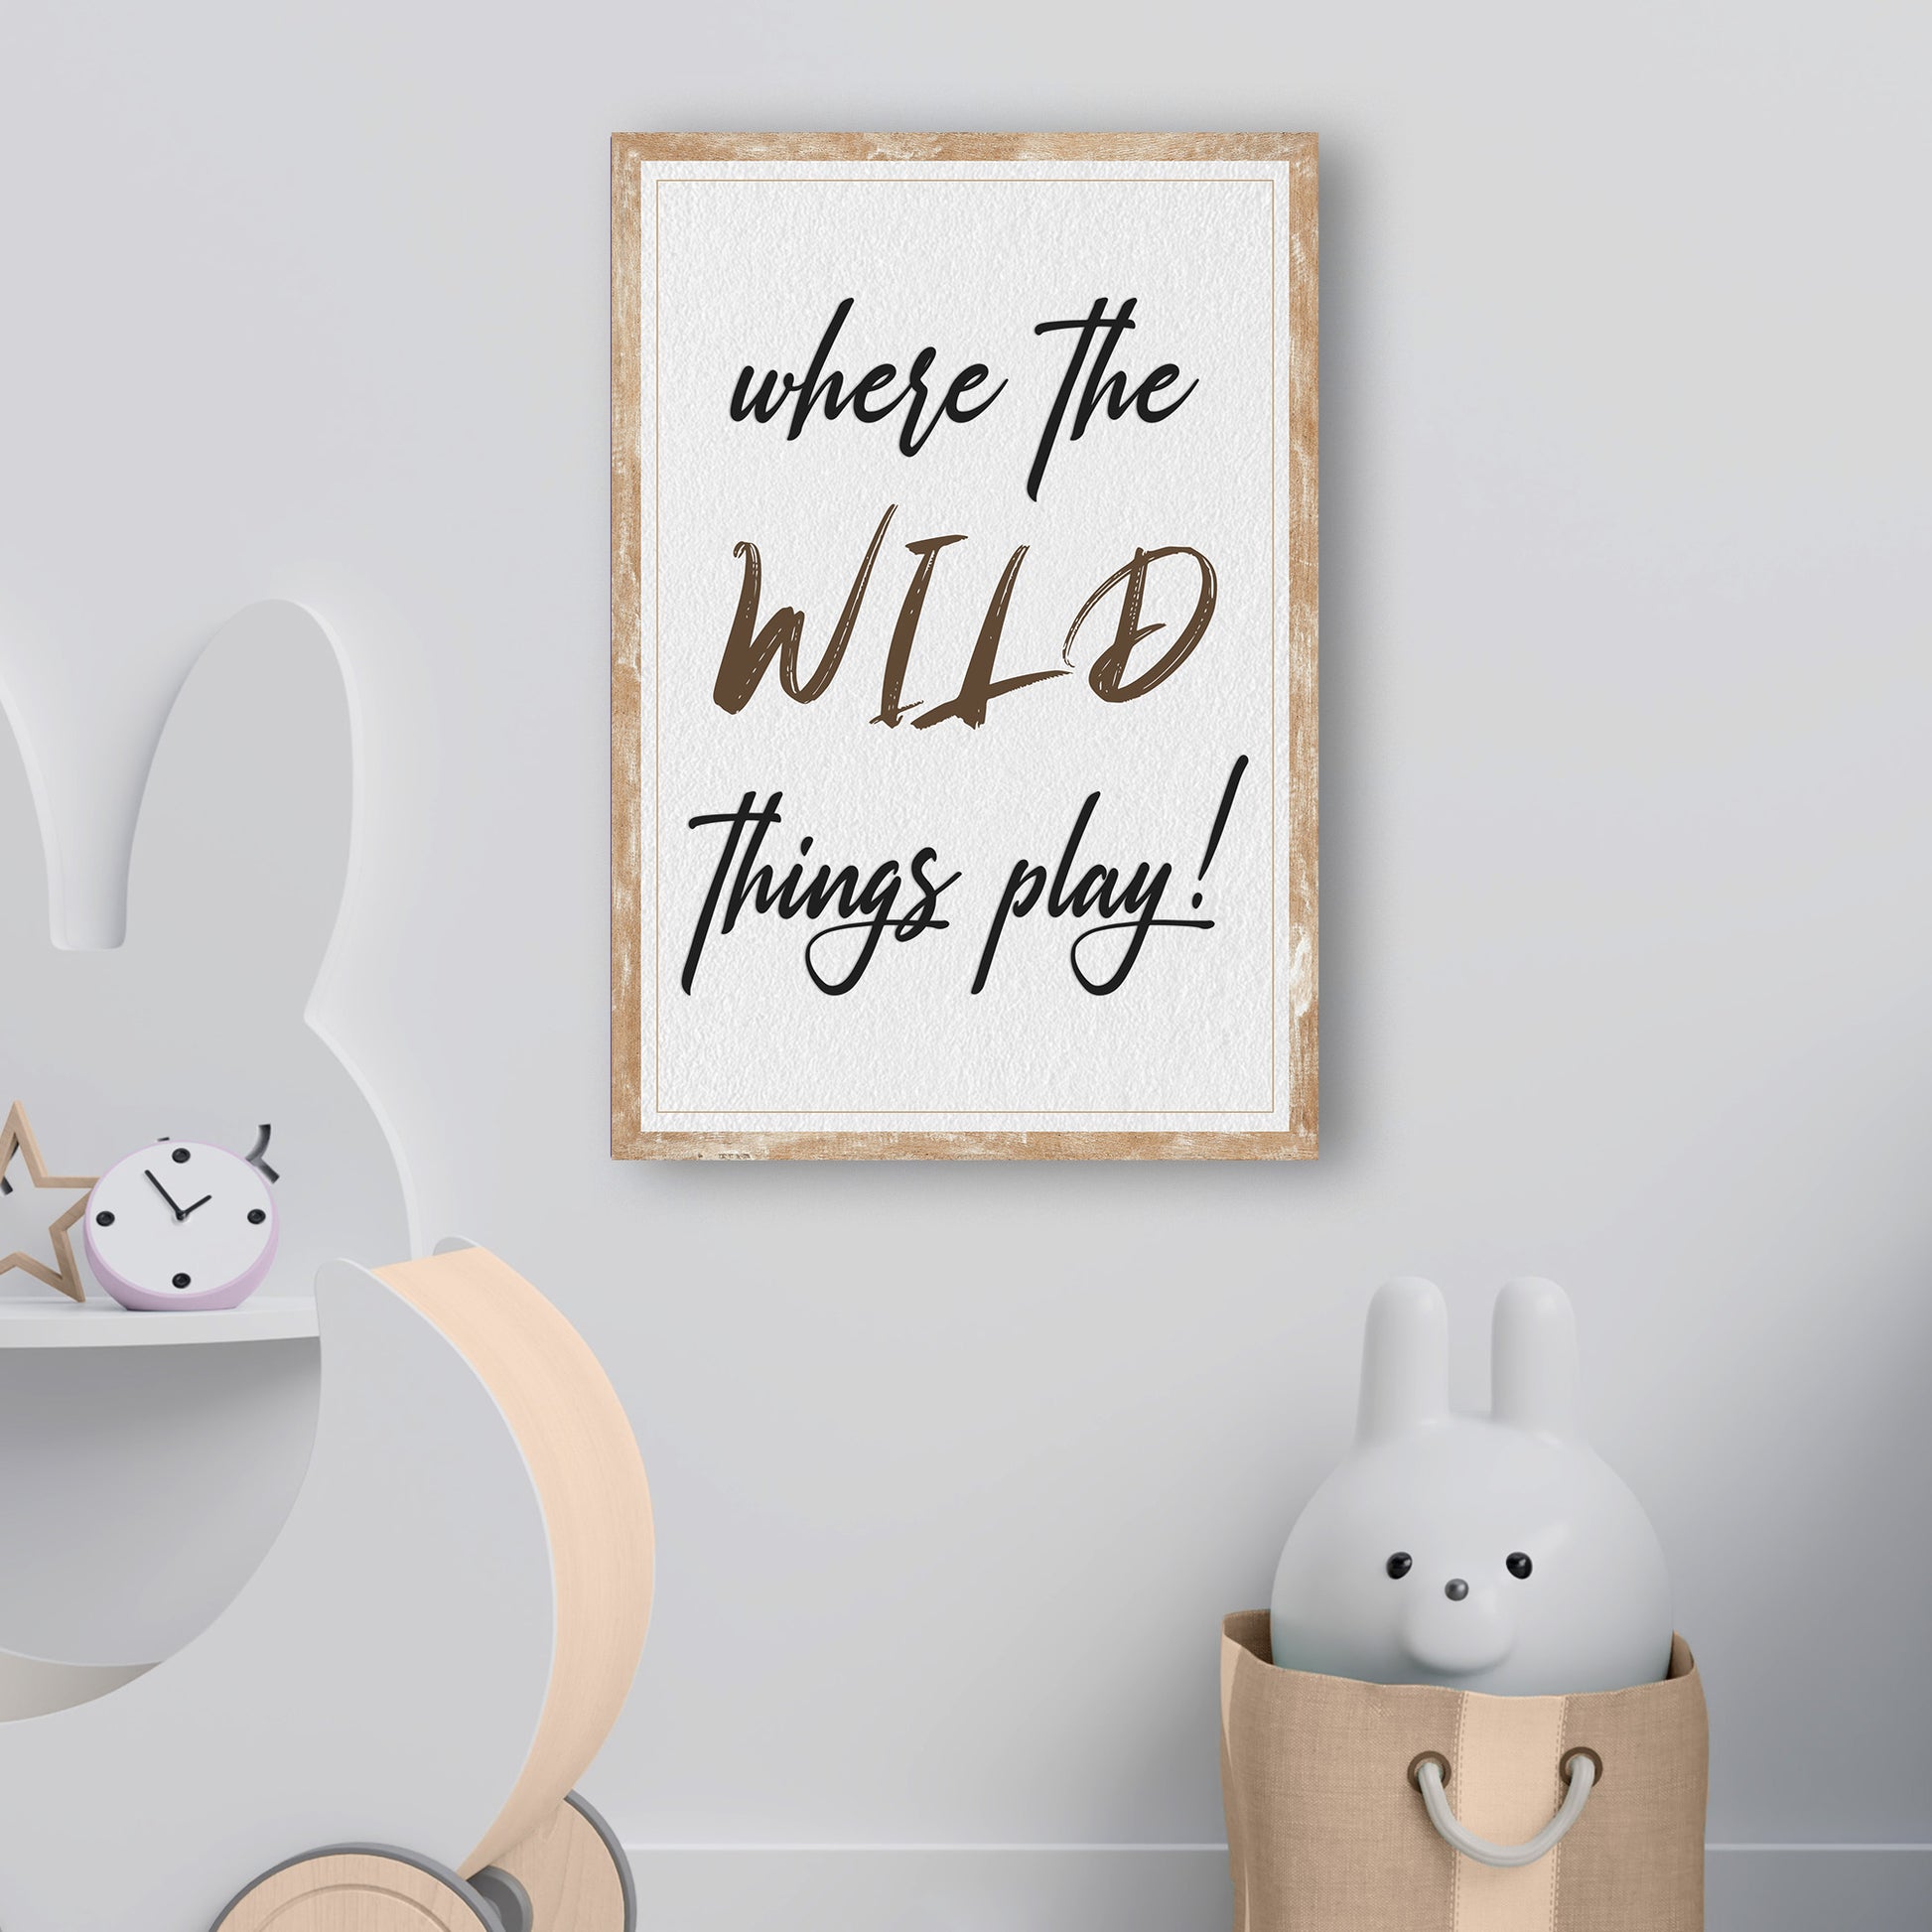 Where The Wild Things Play Sign - Image by Tailored Canvases